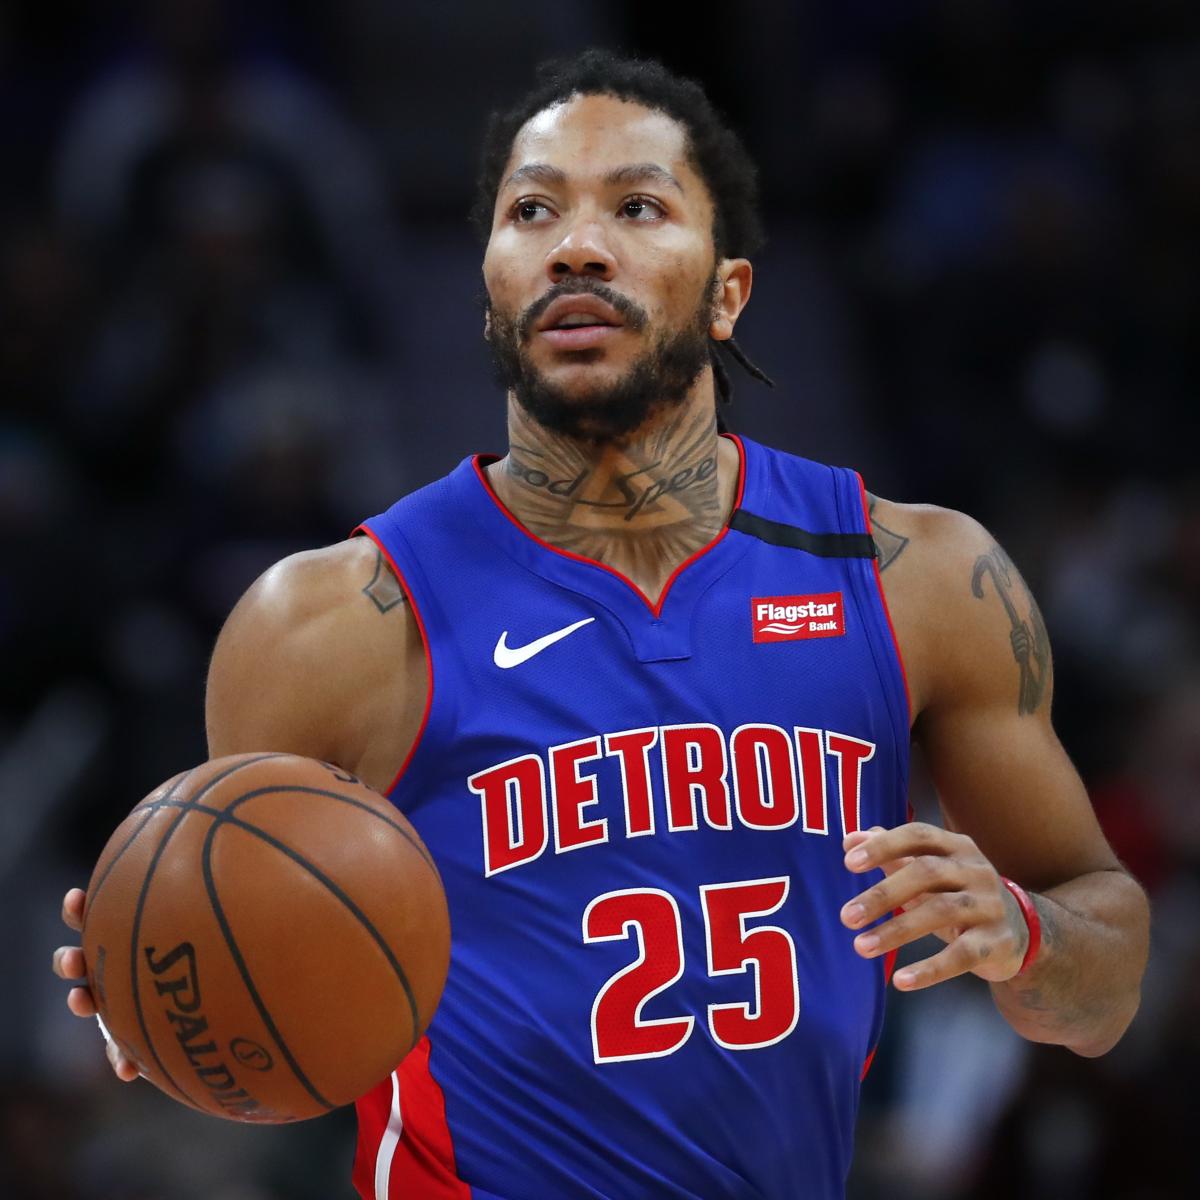 Derrick Rose Says He Wants to Stay with Pistons Amid Trade Rumors ...